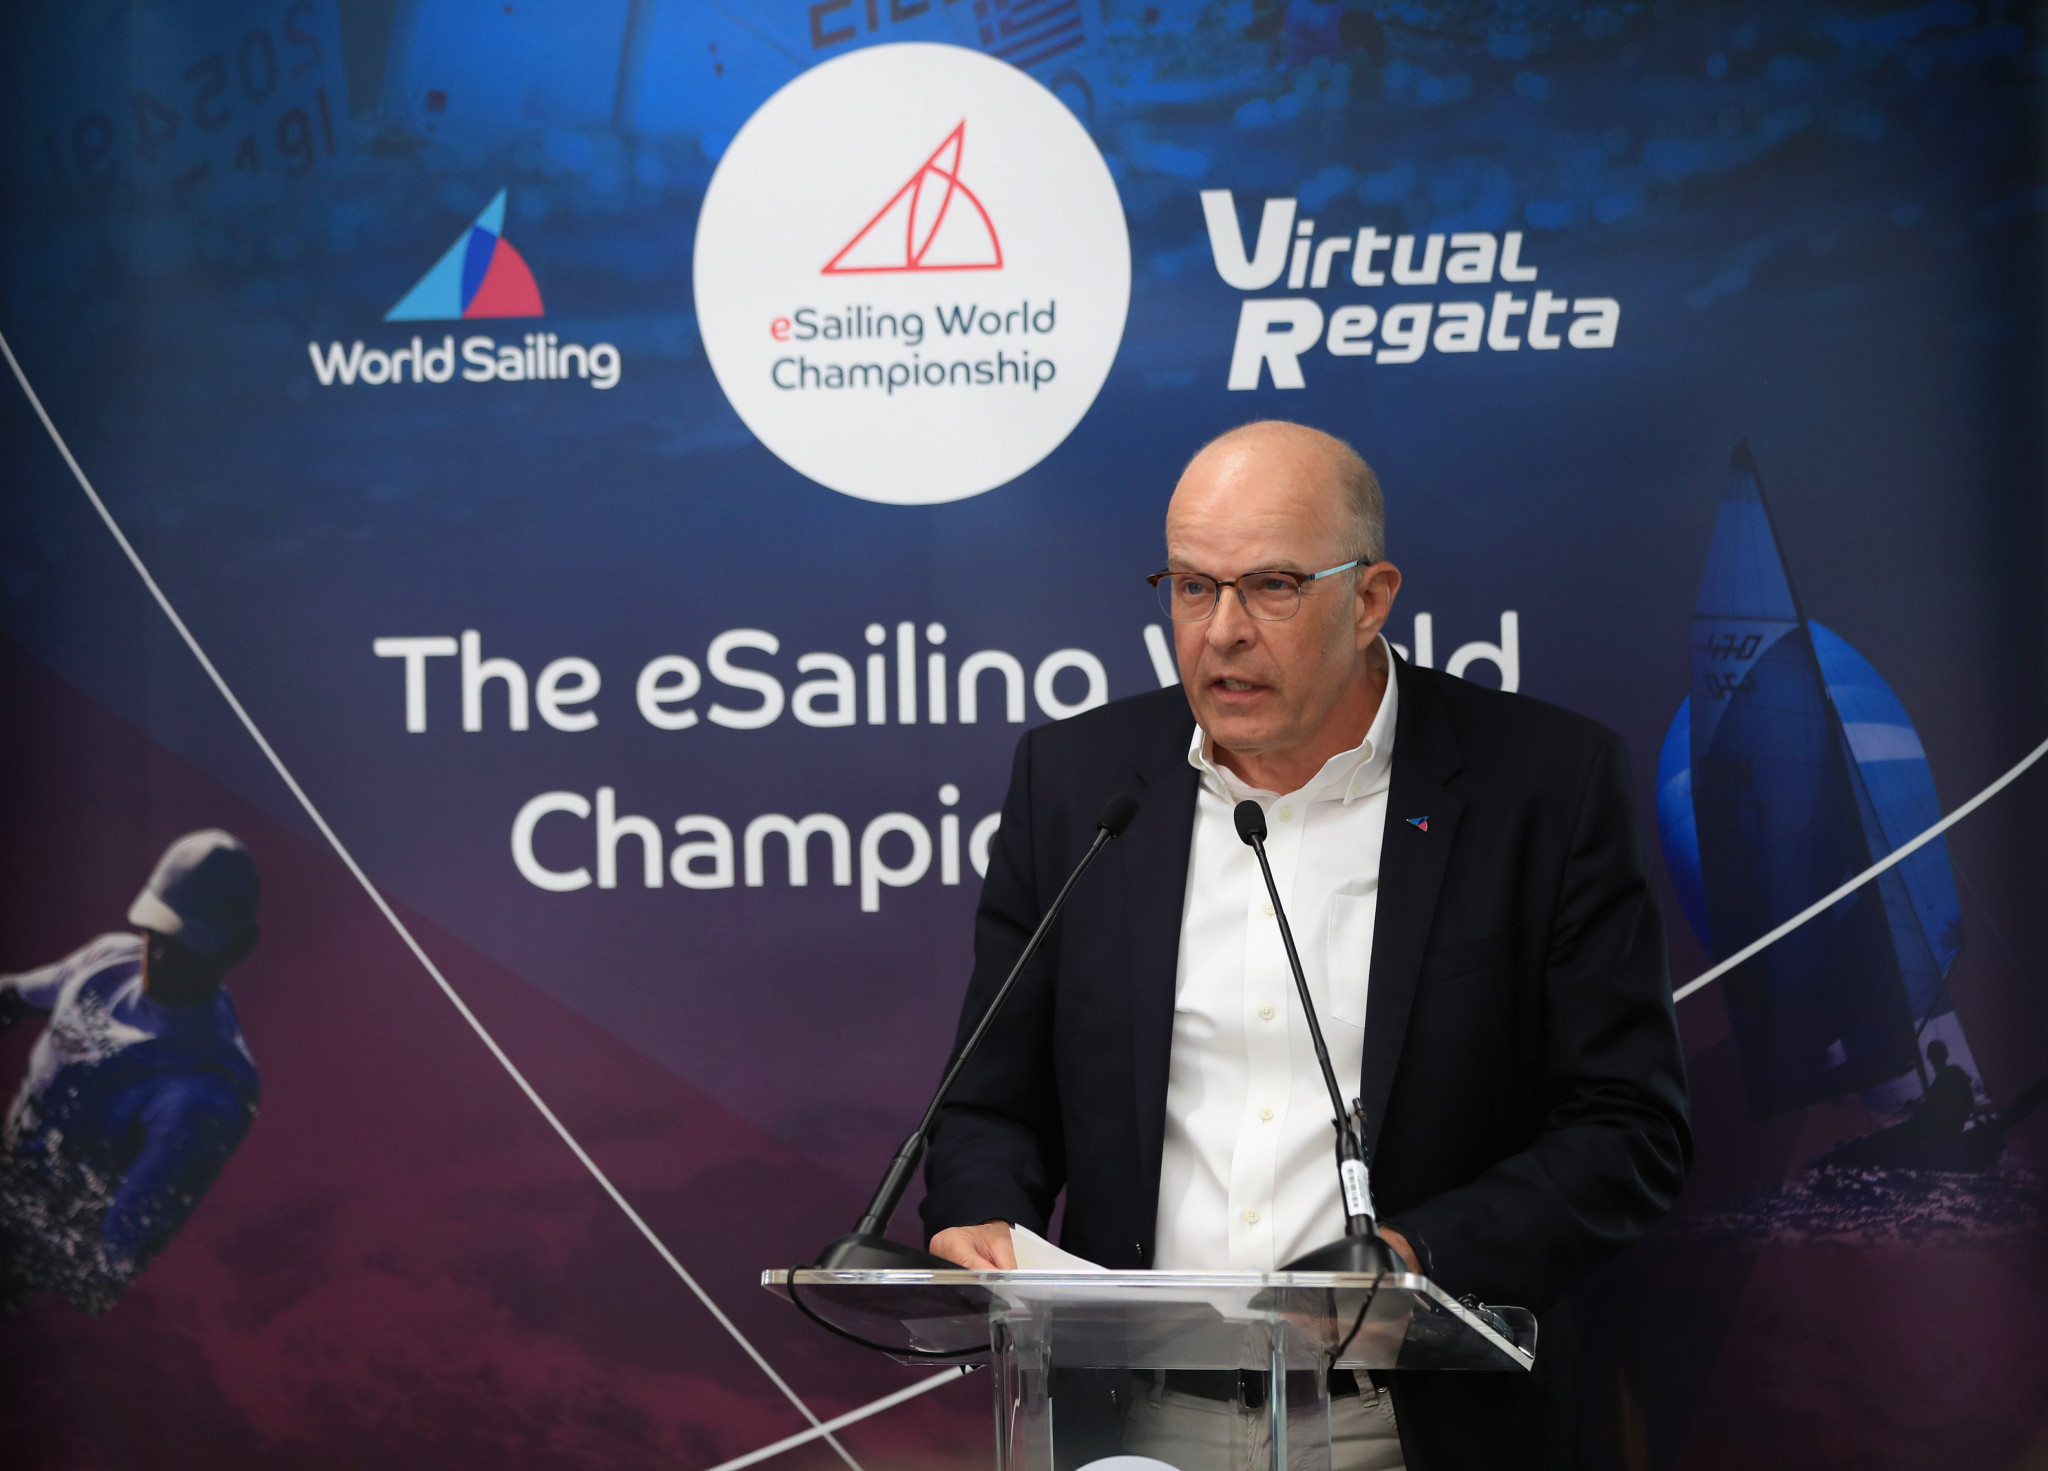 Kim Andersen was elected World Sailing President in 2016 ©Getty Images